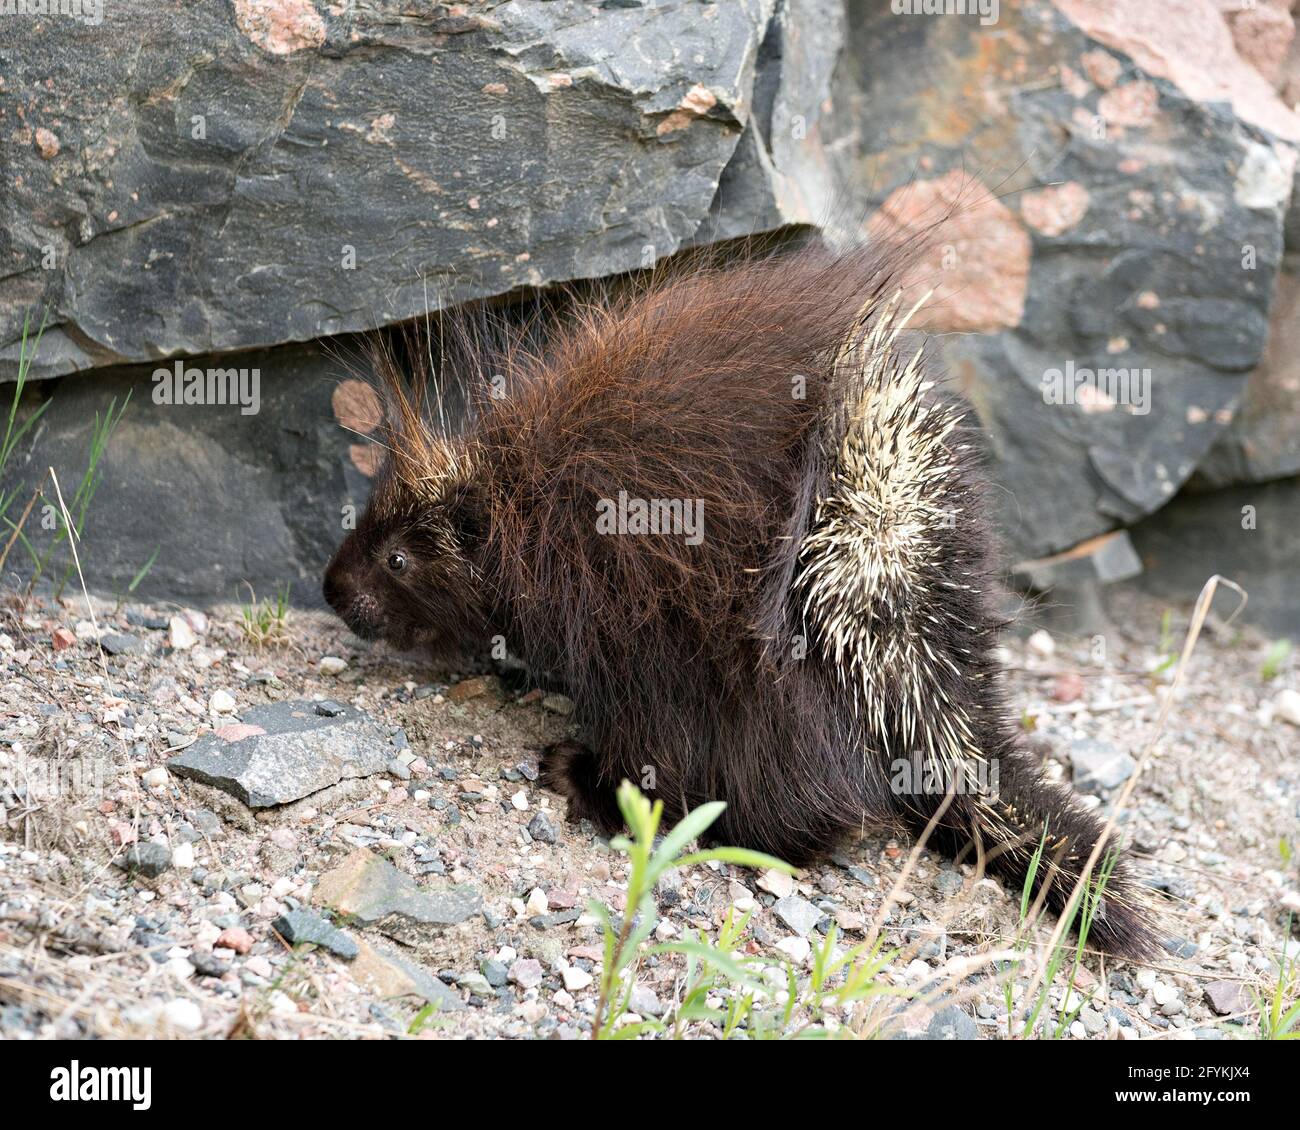 Porcupine animal close-up profile view walking on gravel on the side of road with foliage foreground and rock background in its environment. Stock Photo